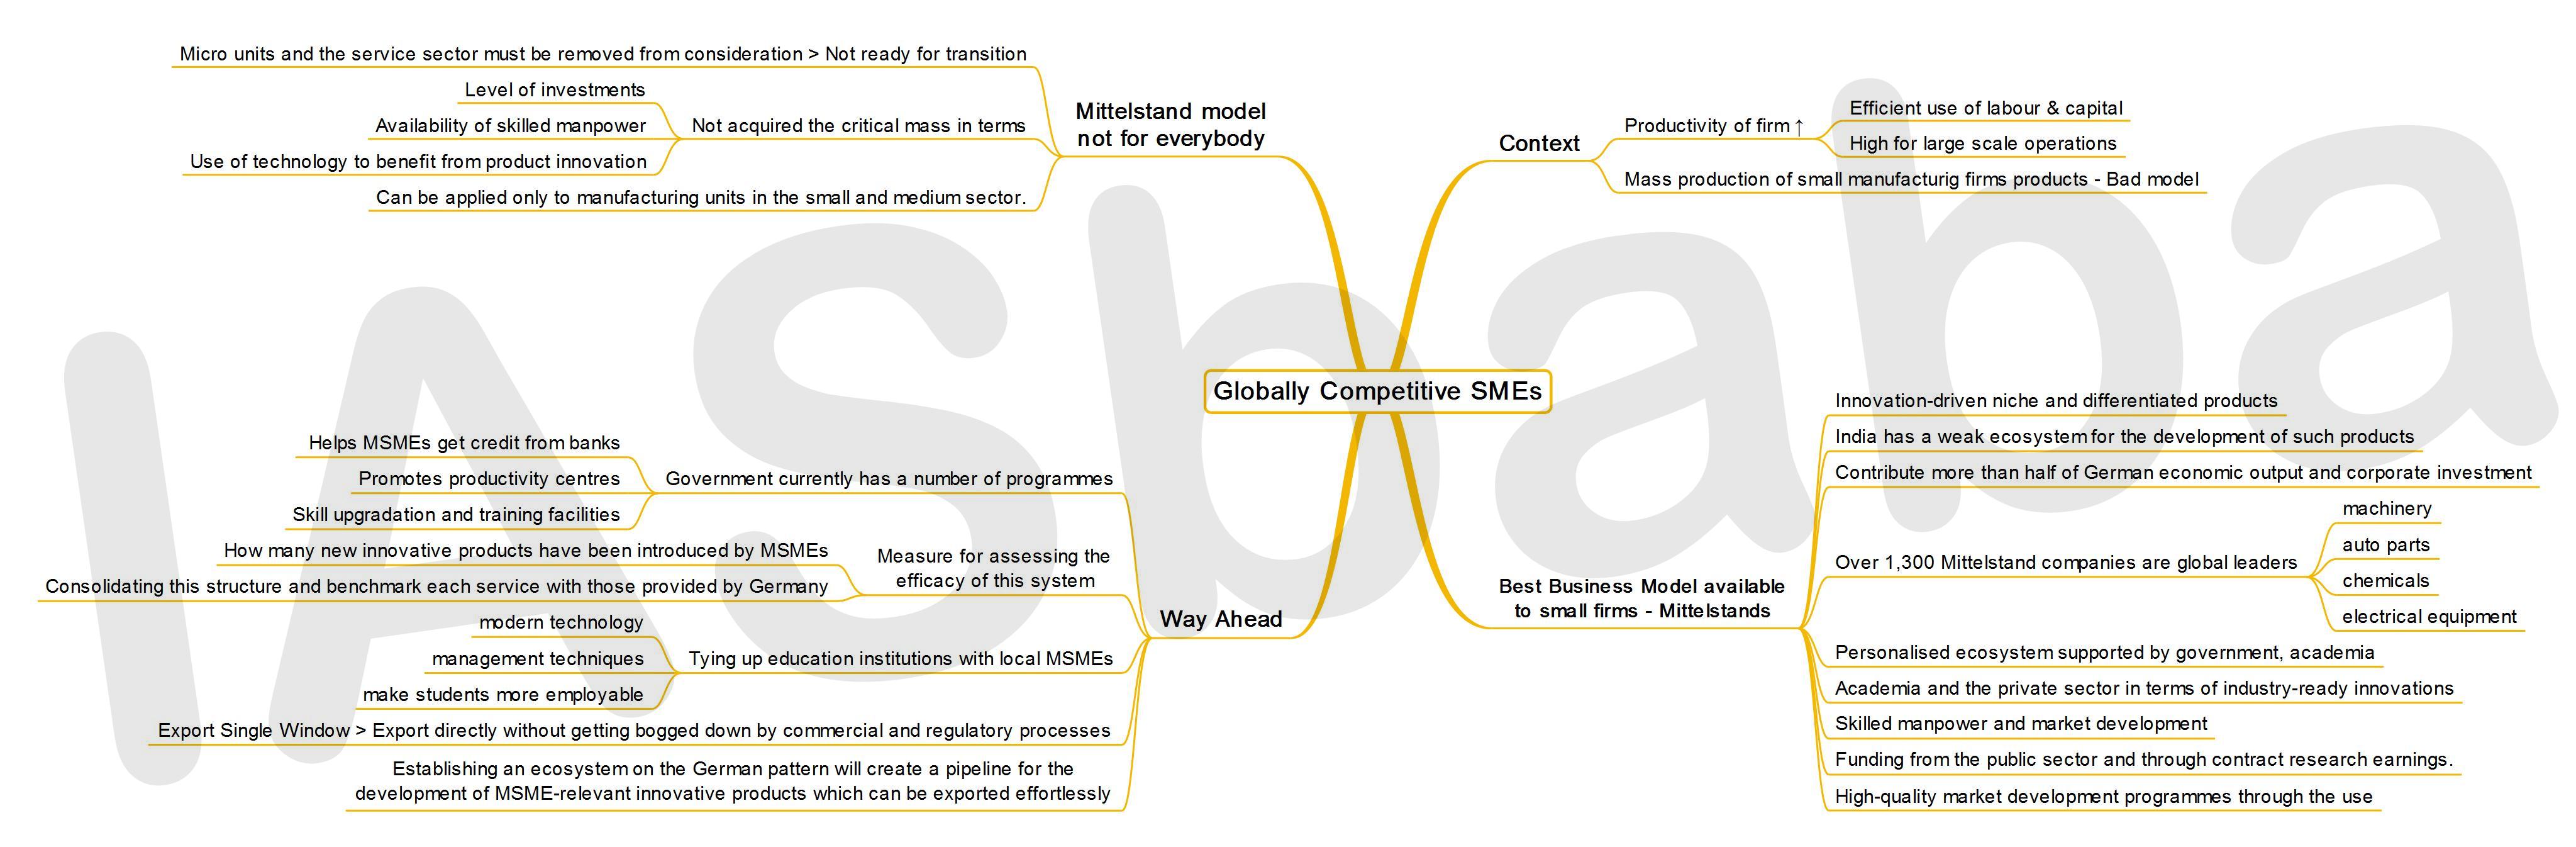 IASbaba’s MINDMAP : Issue - Globally Competitive SMEs